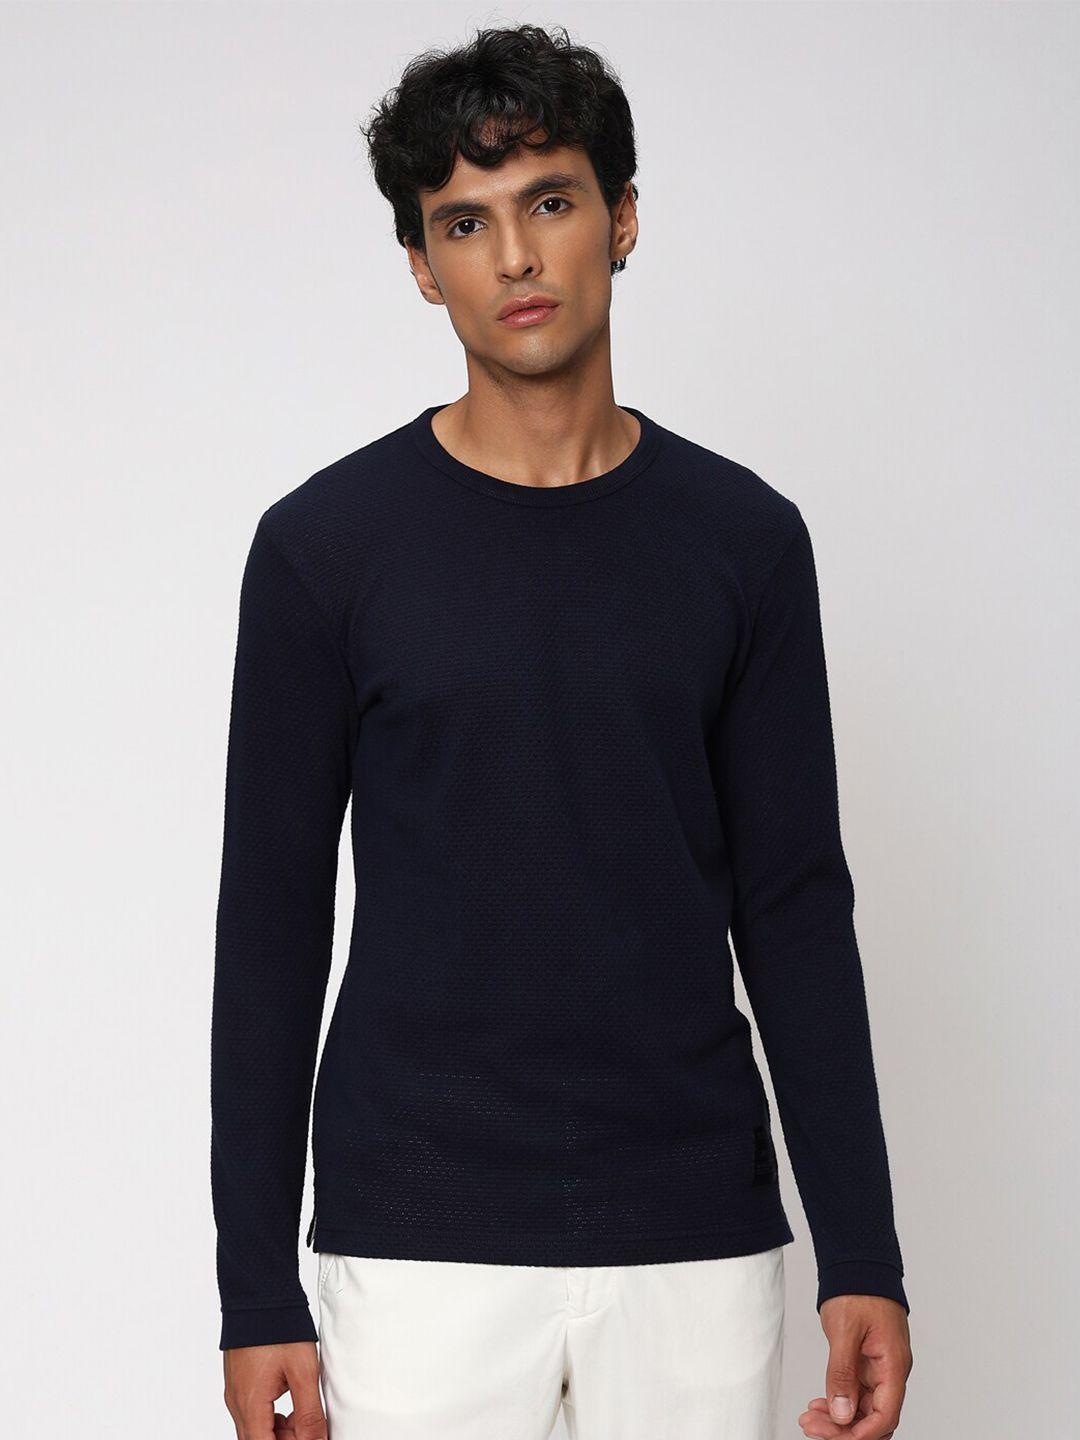 mufti-self-design-round-neck-long-sleeves-slim-fit-t-shirt